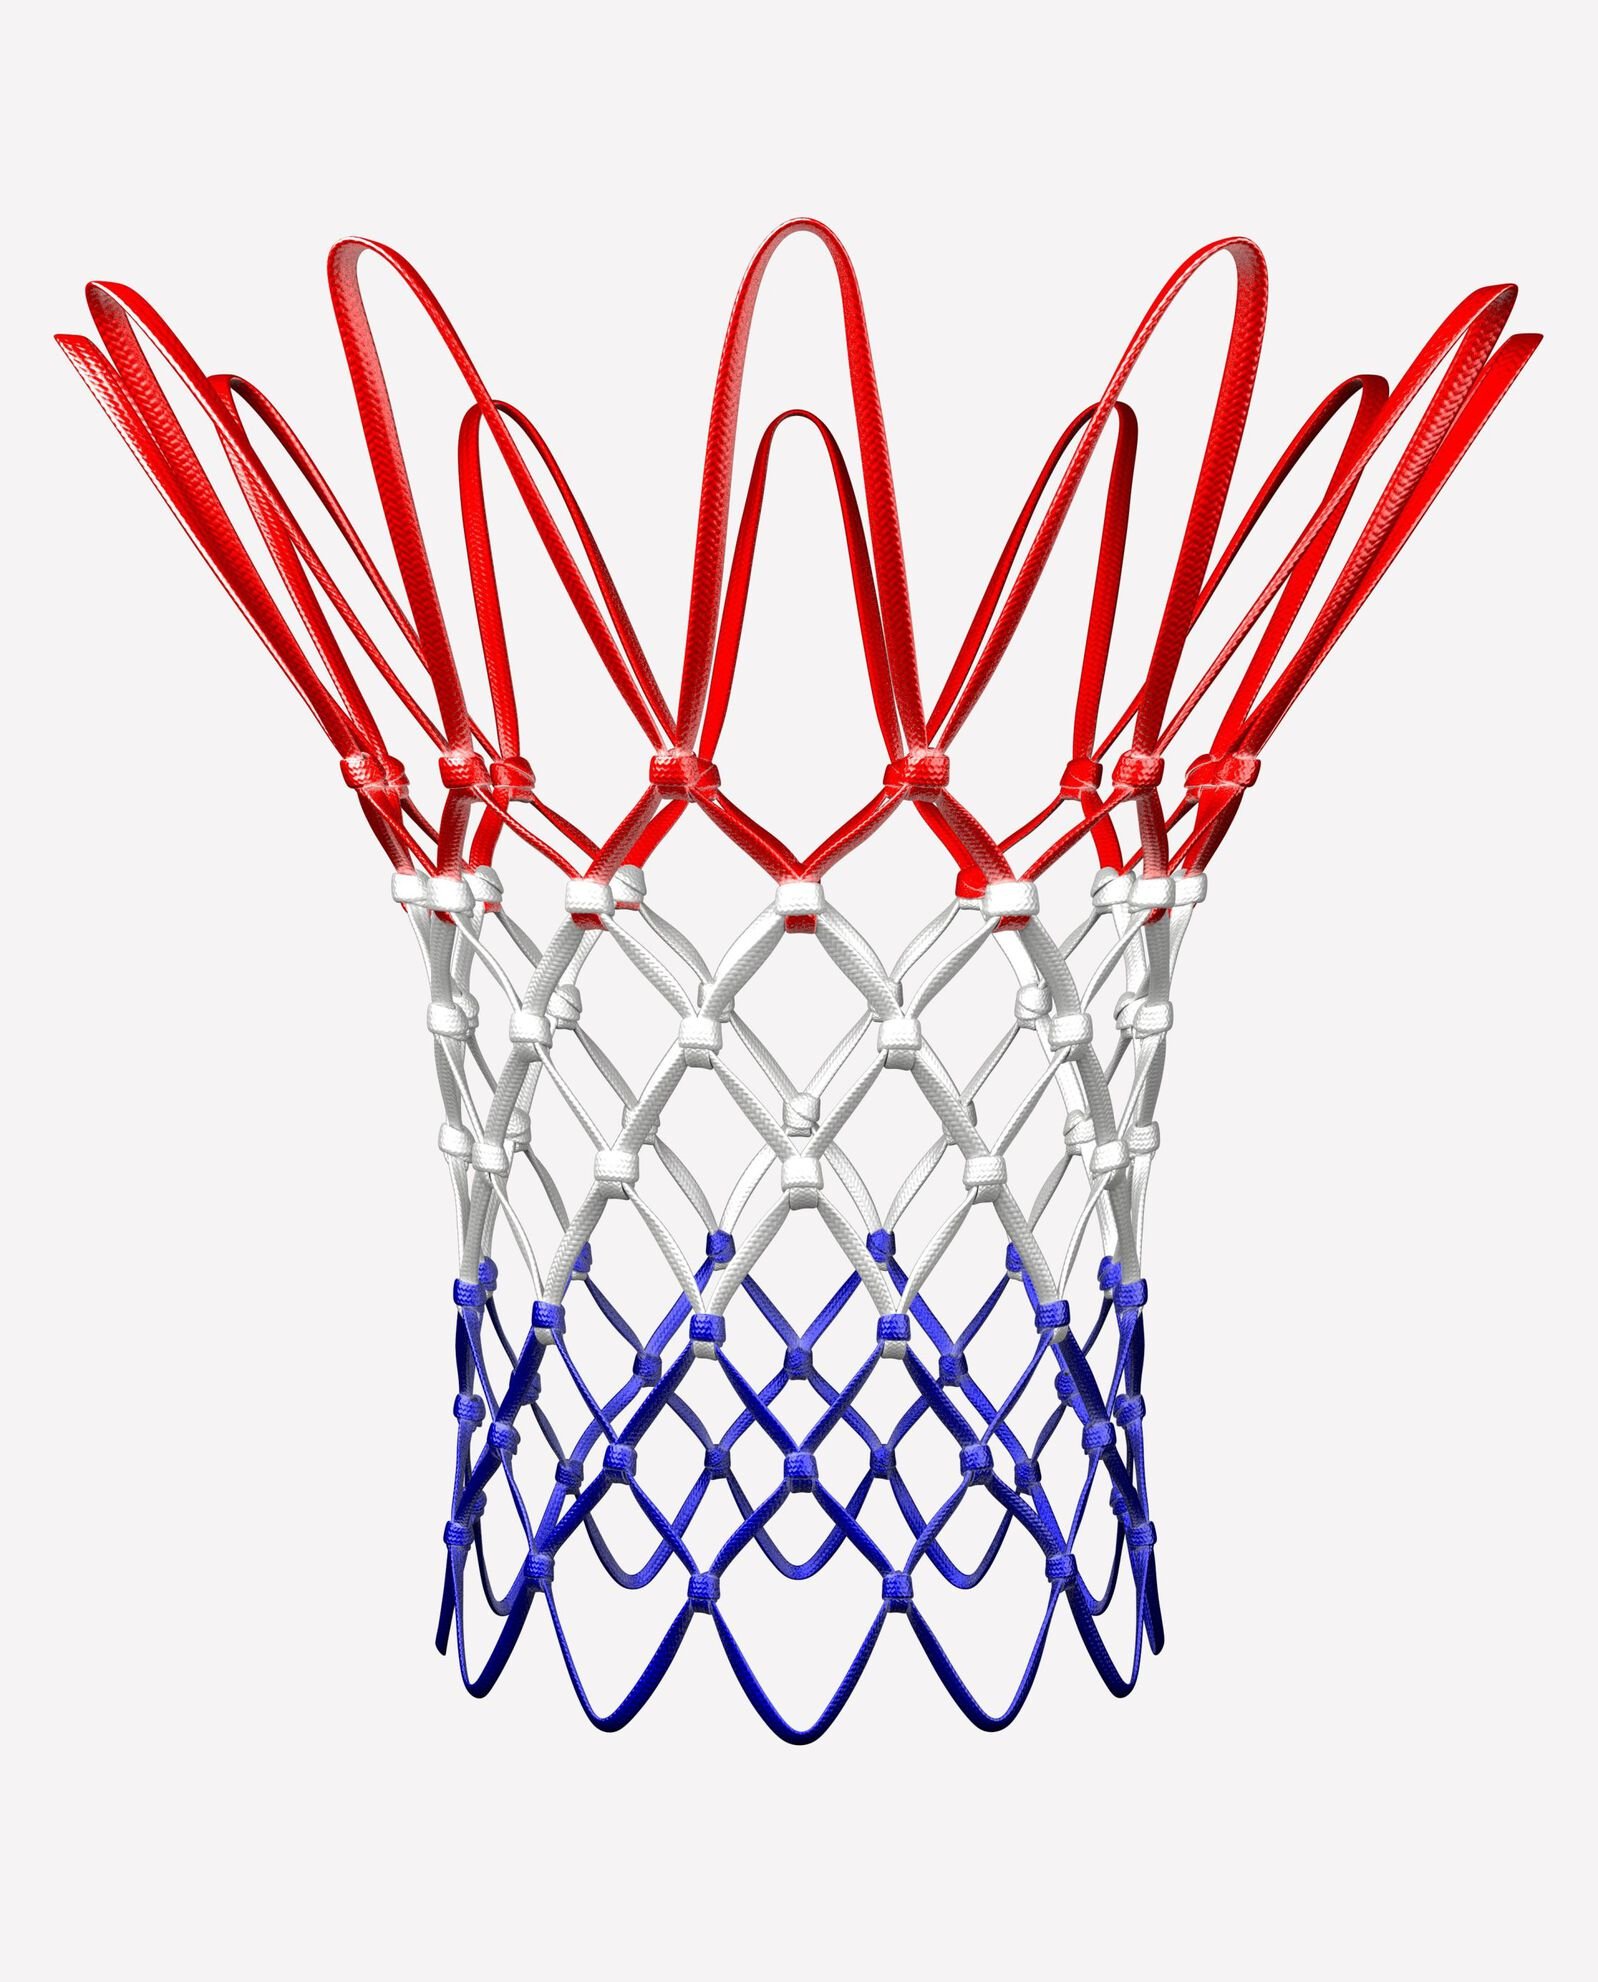 All-Weather Basketball Net - Red/White/Blue red/white/blue